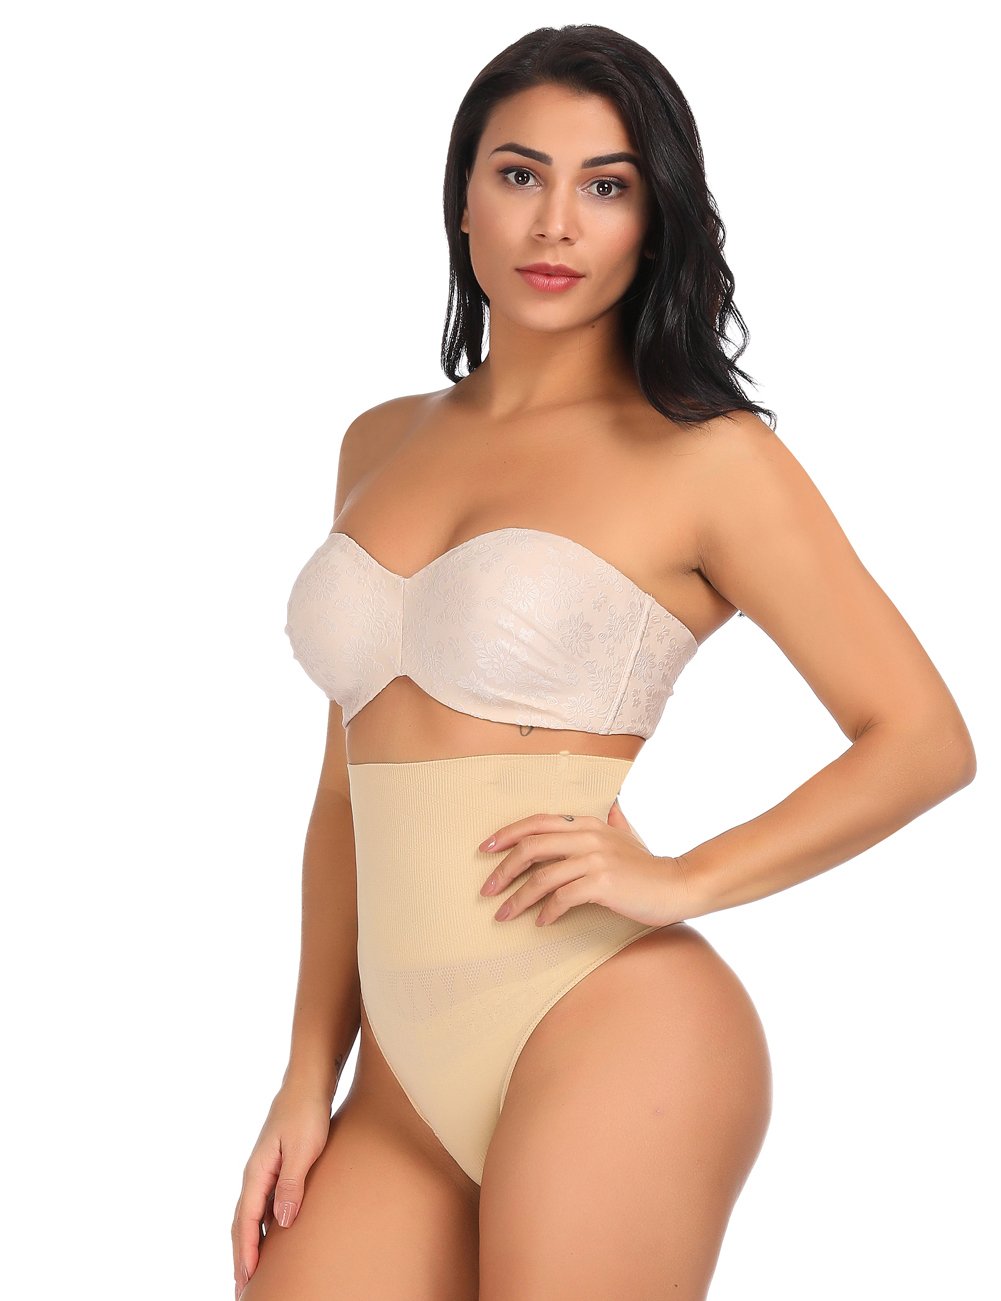 FXLCMUS Thong Shapewear Bodysuit - Correct Fit, Comfort, and Super